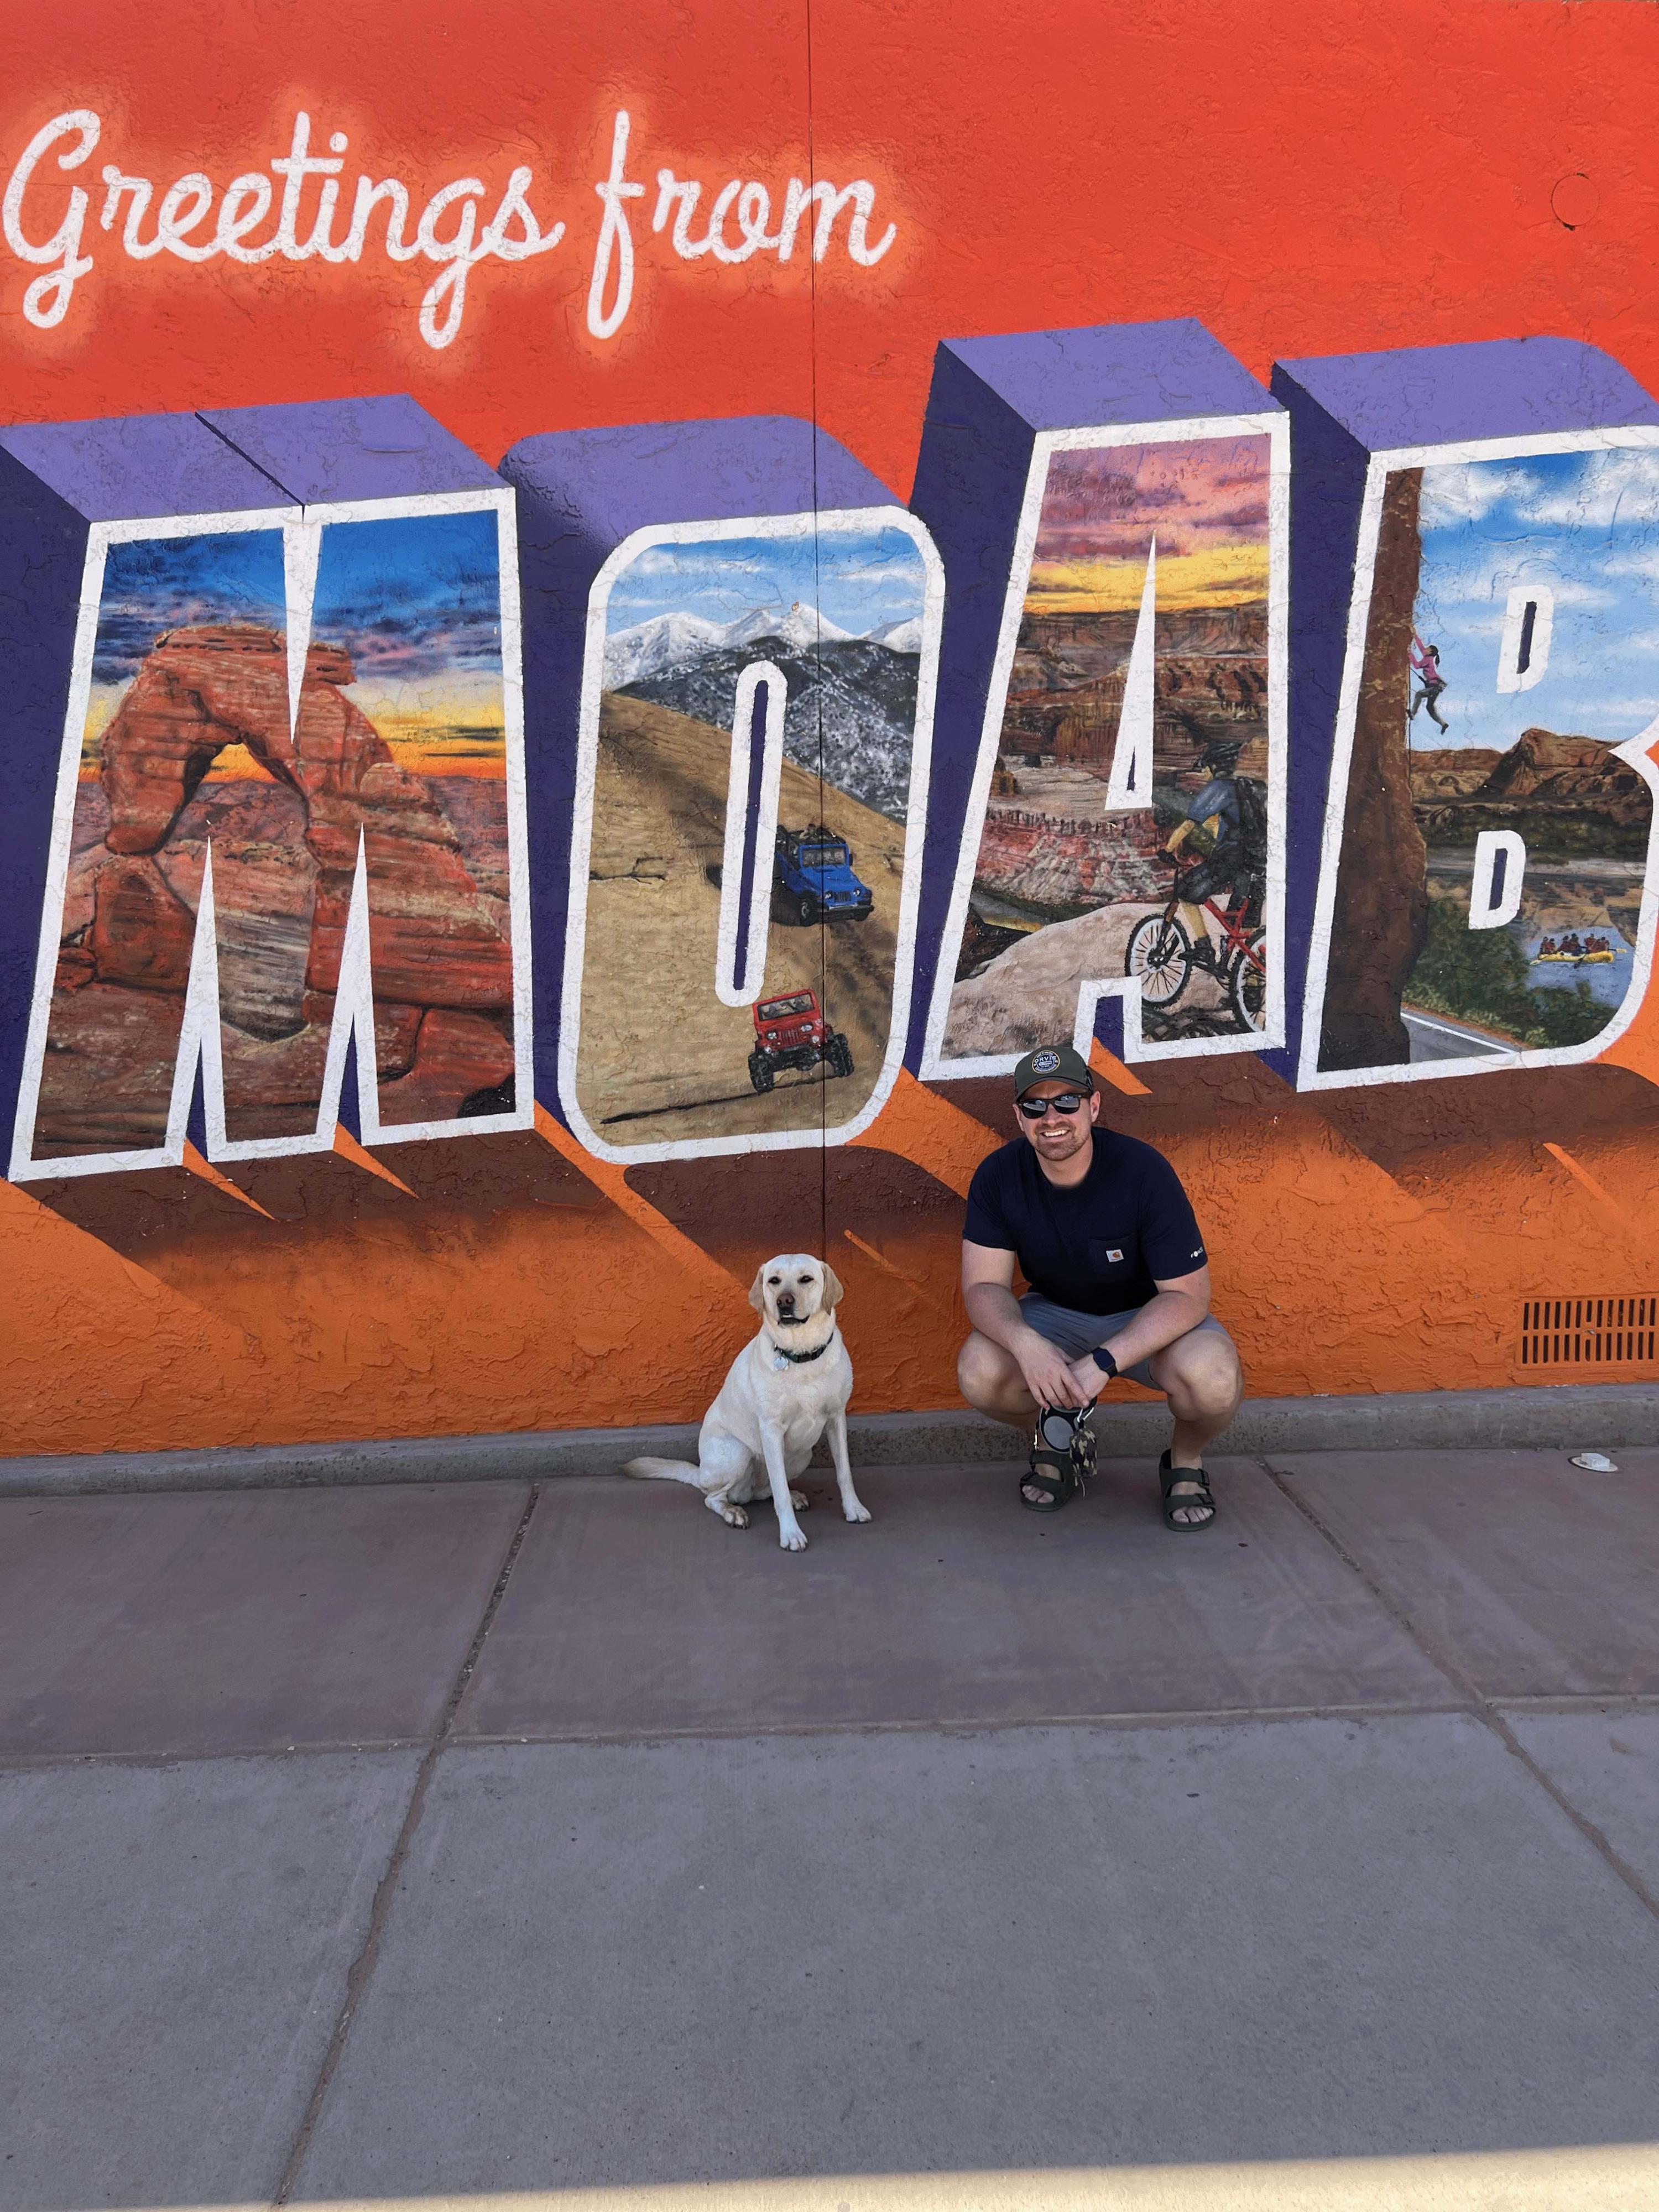 A man and a dog posing in front of a wall that reads "Greetings from MOAB"